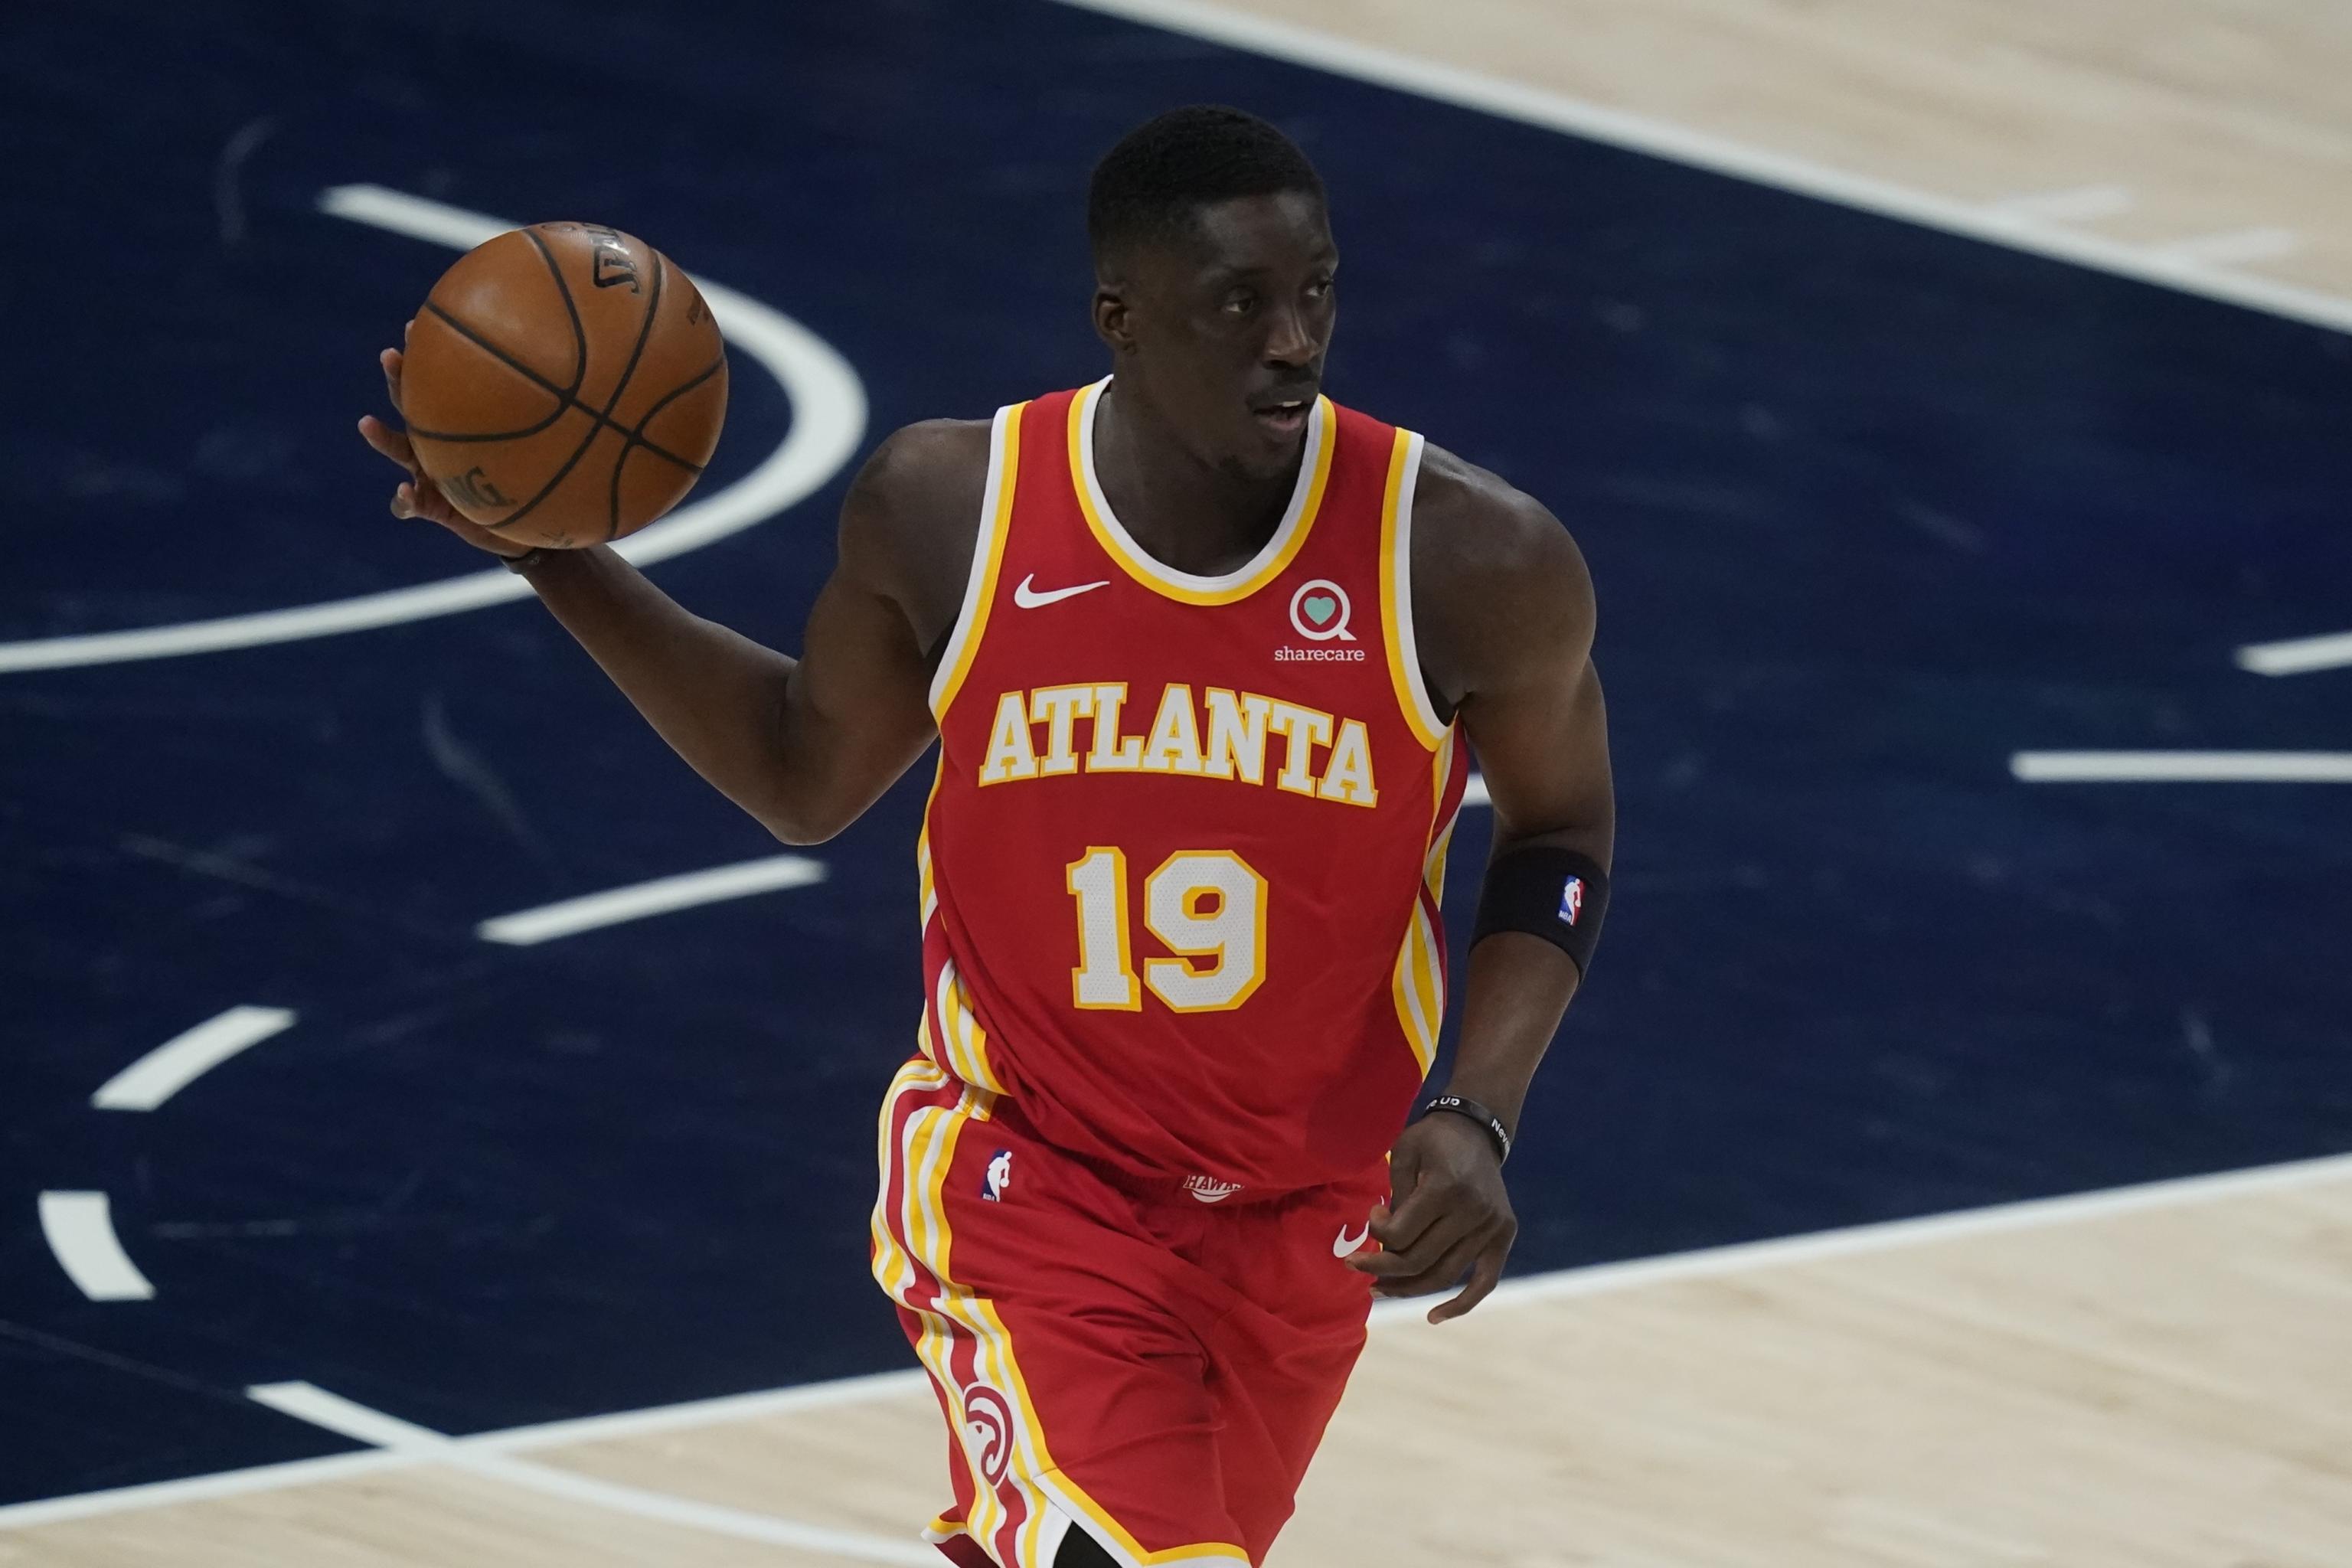 Tony Snell 2023 – Net Worth, Salary, Records, and Endorsements